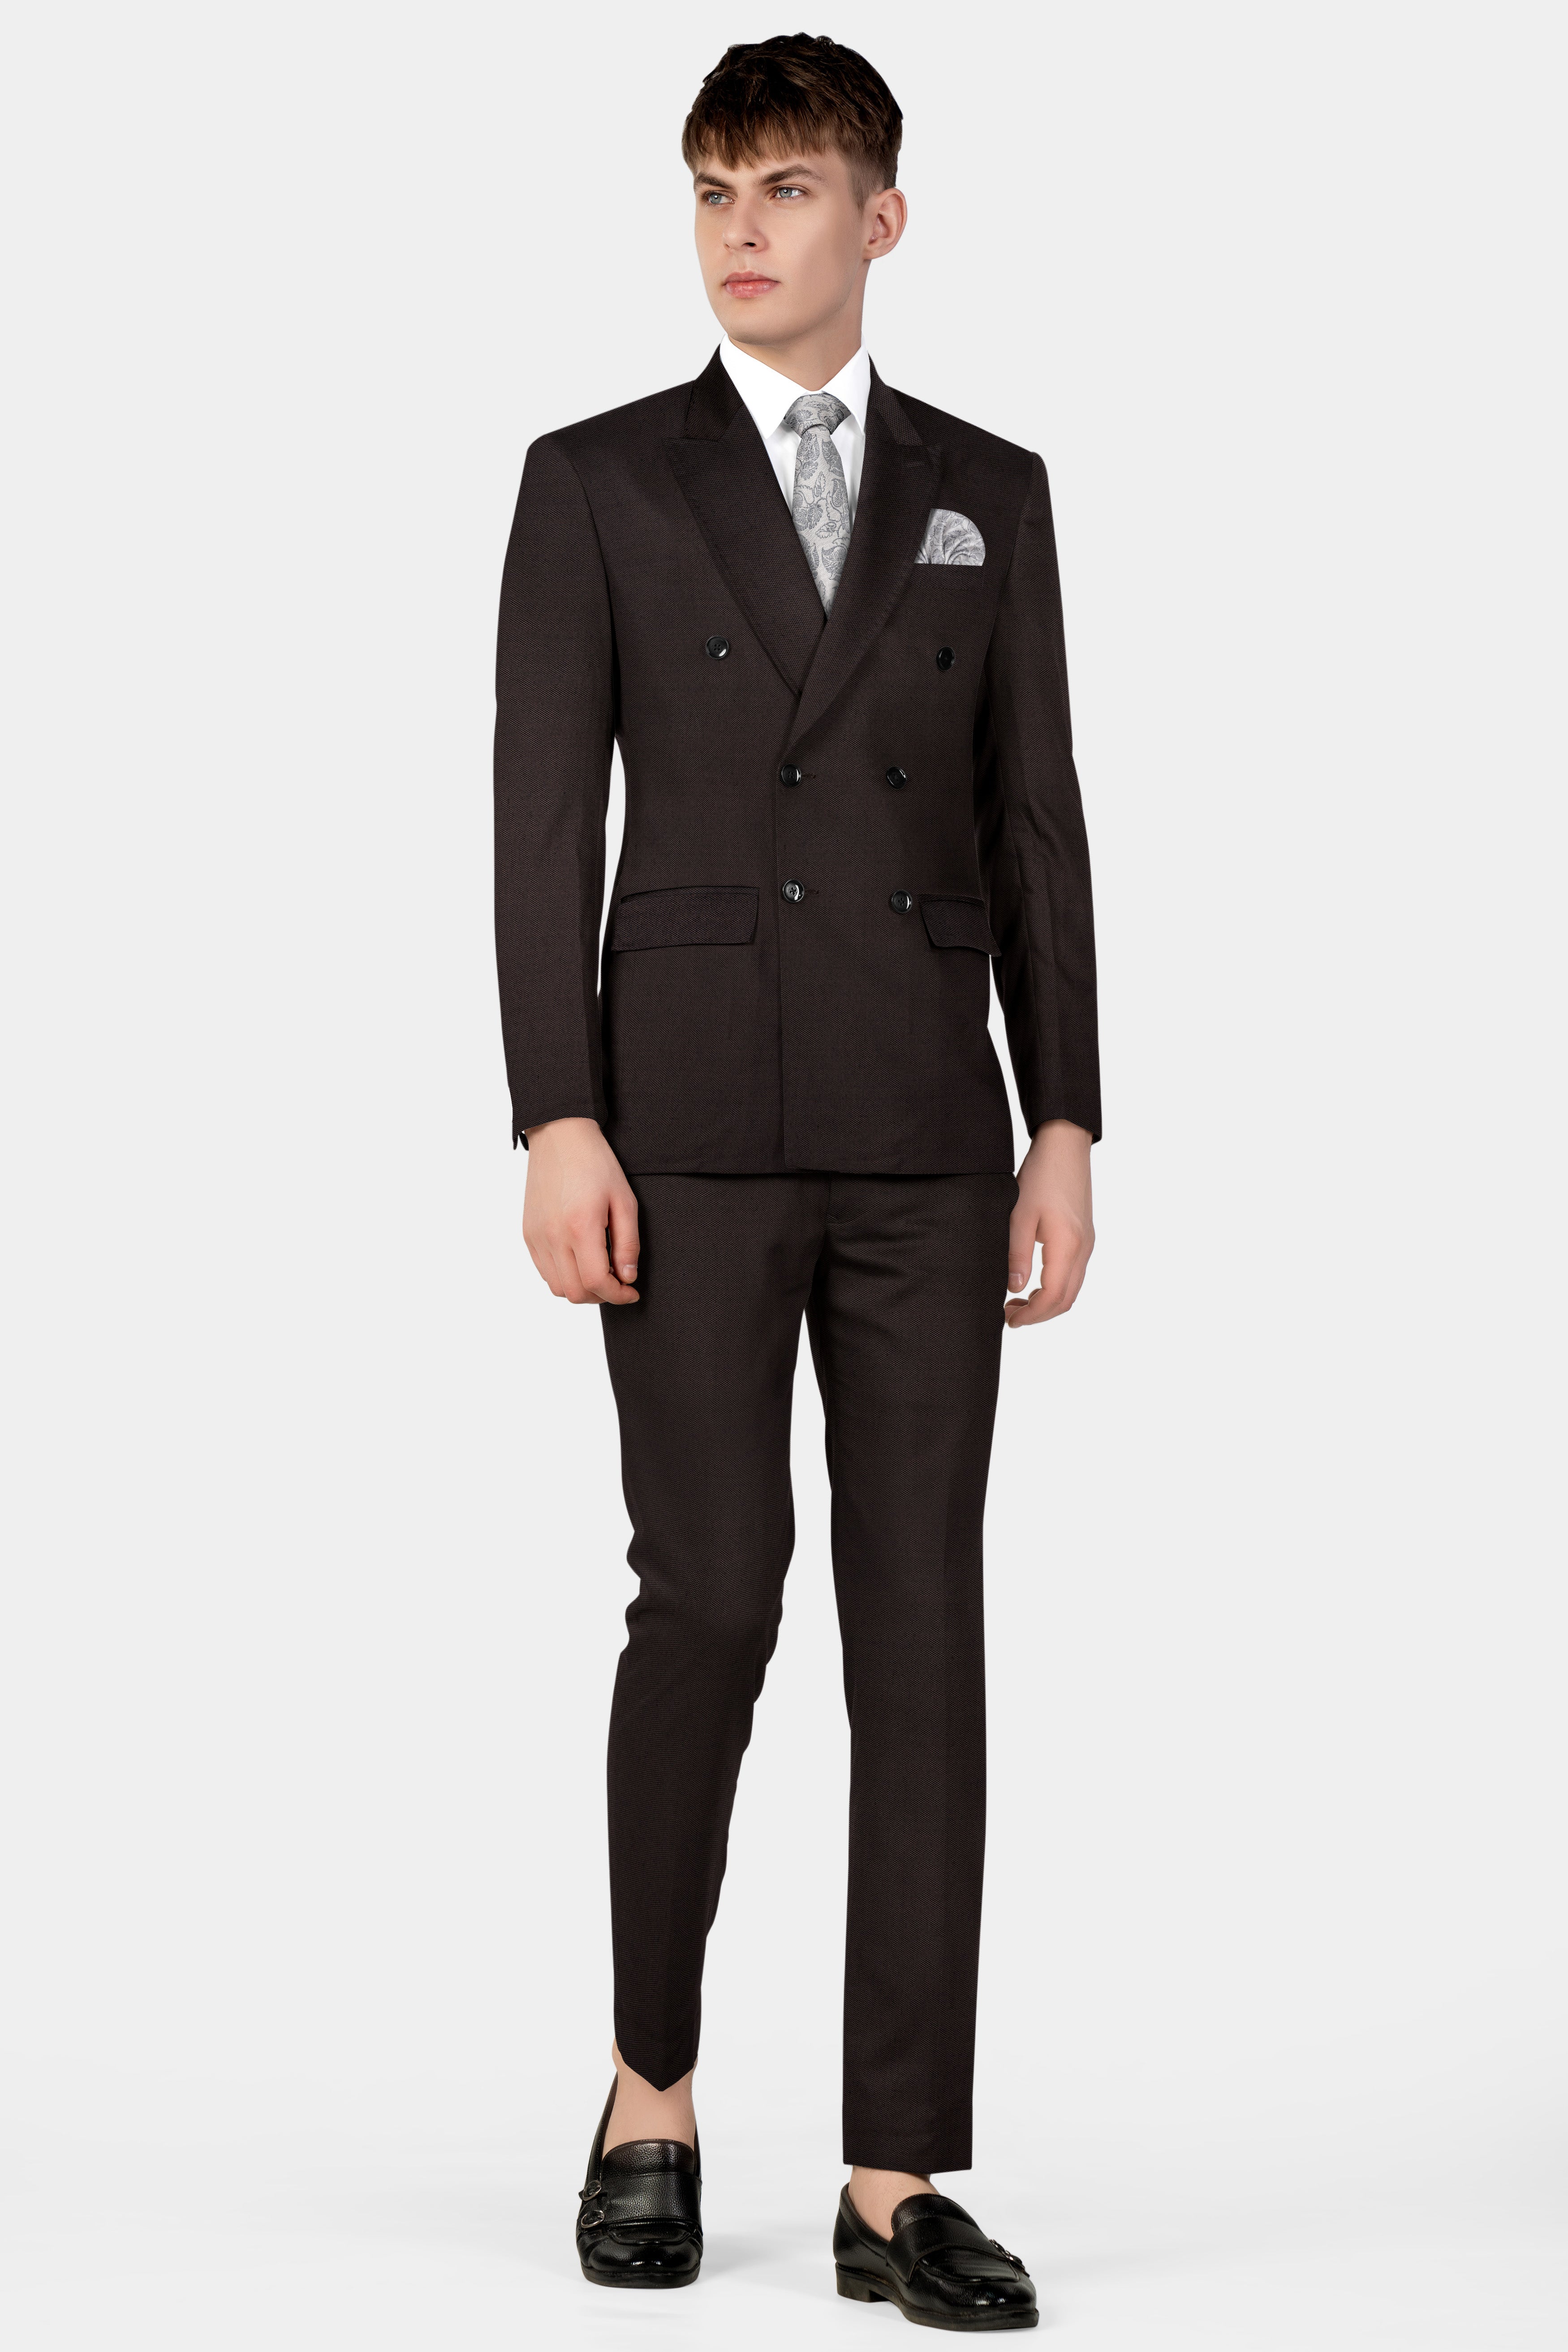 Zeus Brown Dobby Textured Wool Blend Double Breasted Suit